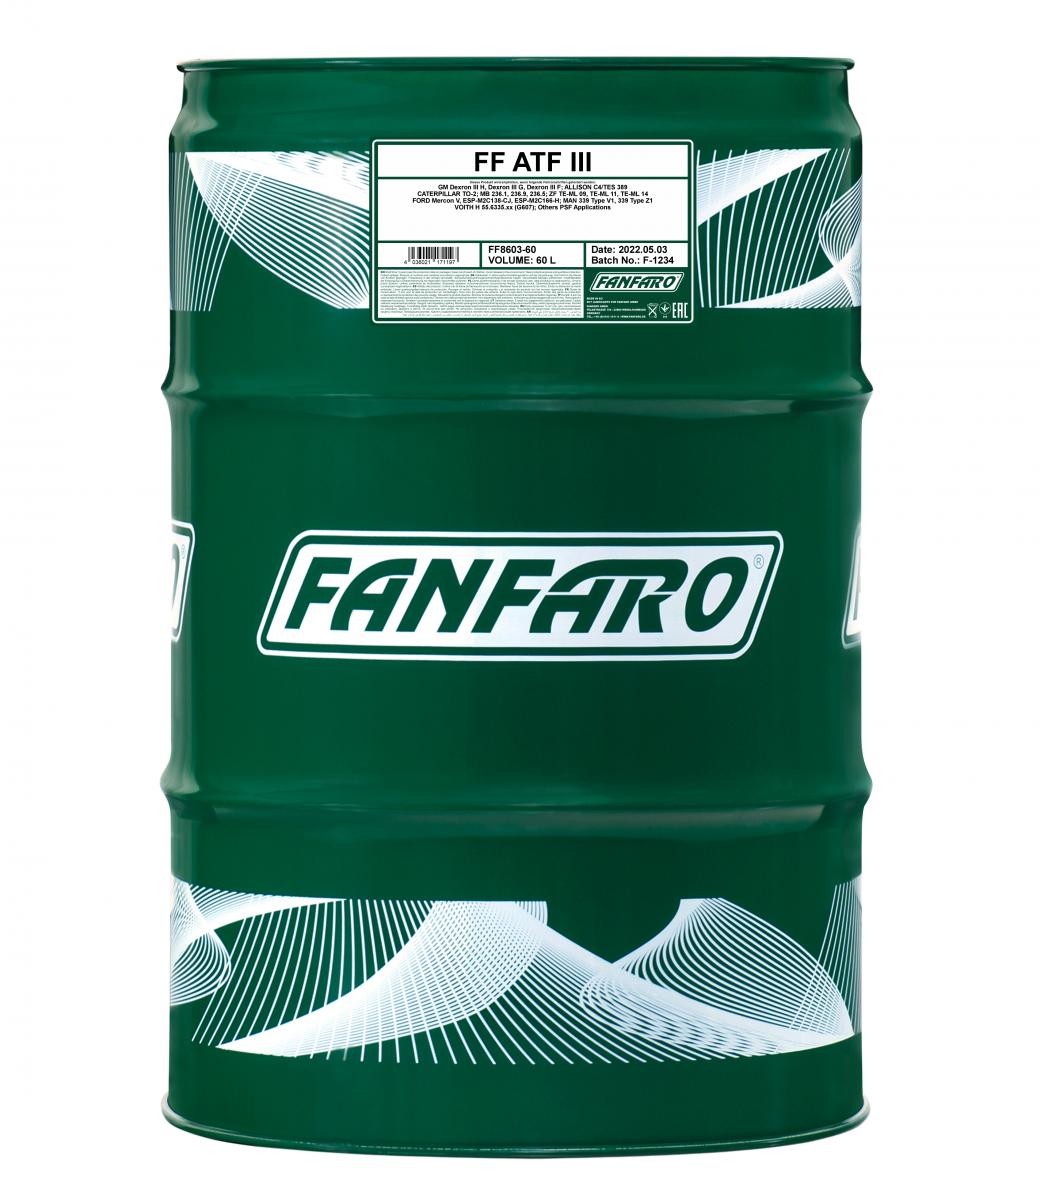 Great value for money - FANFARO Automatic transmission fluid FF8603-60